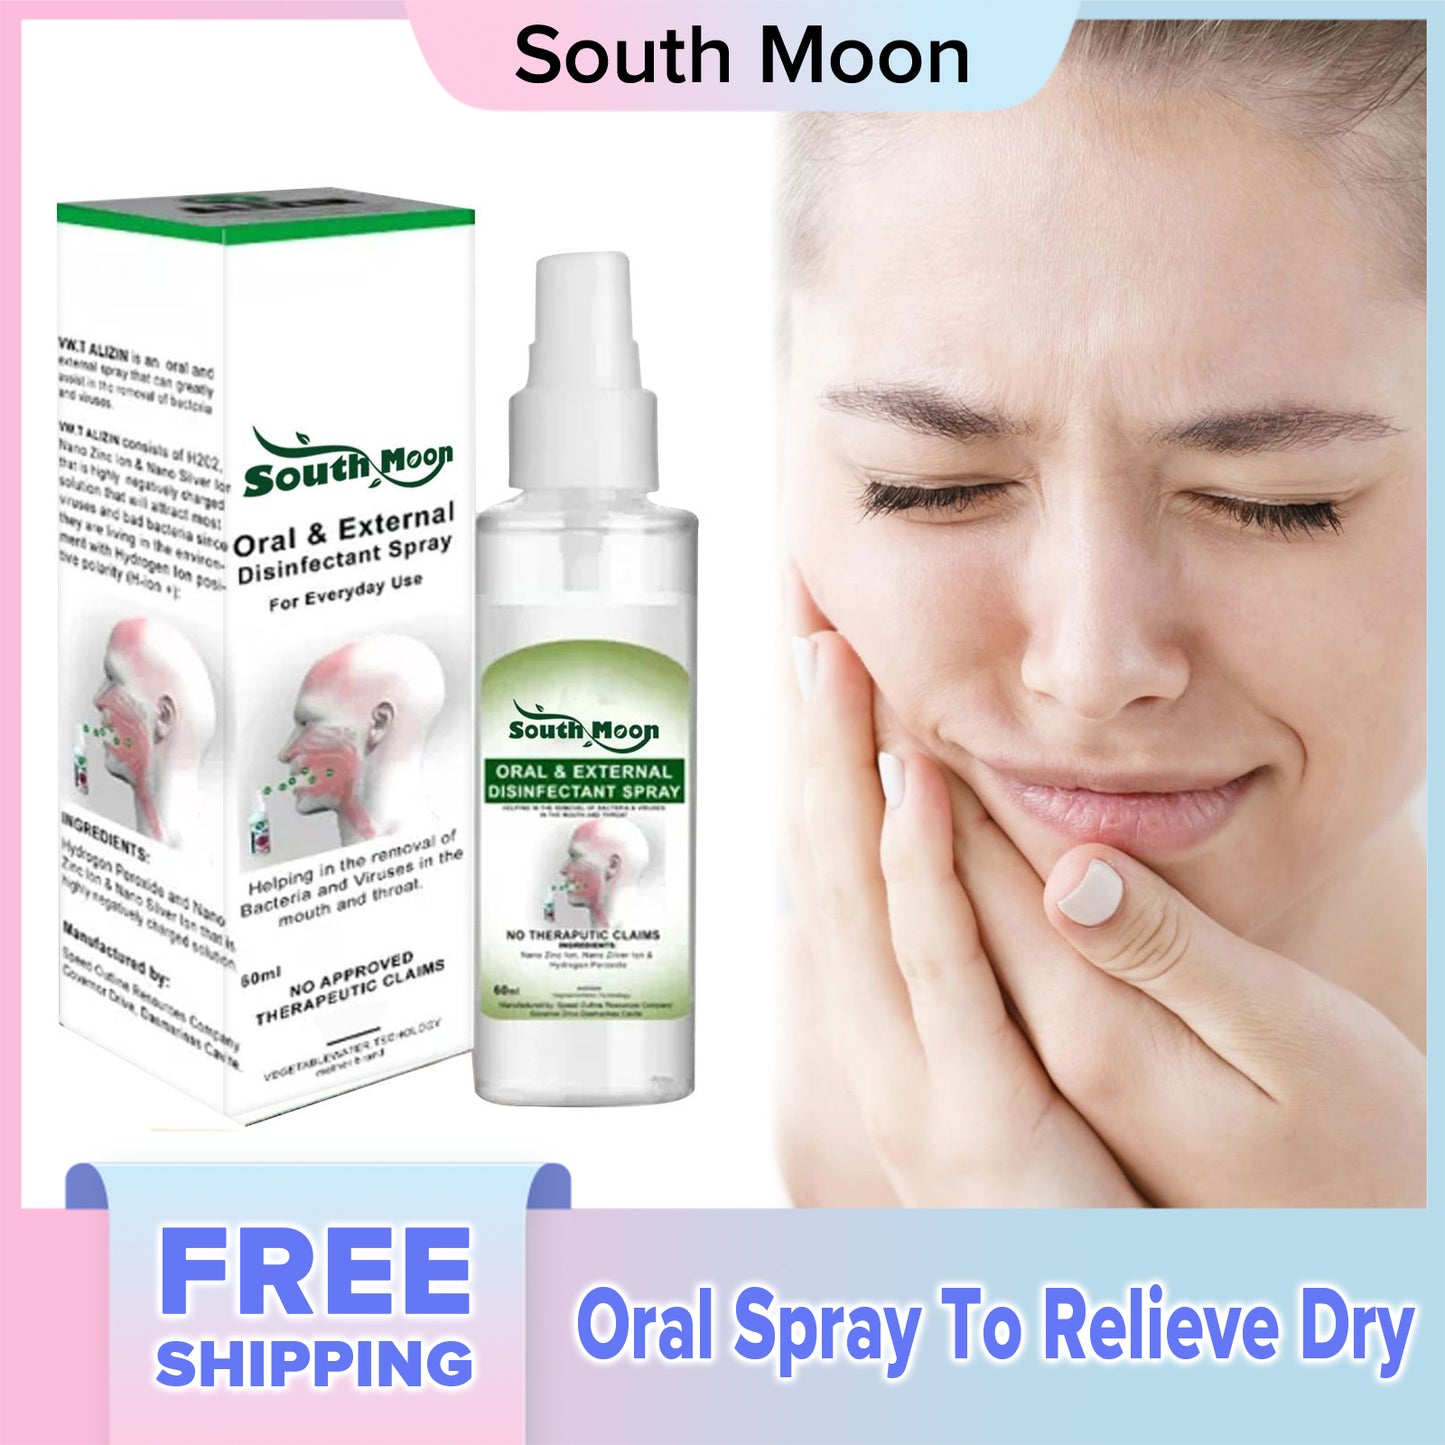 South Moon Oral Spray To Relieve Dry, Itchy And Uncomfortable Mouth, Gum Repair, Bad Breath And Breath Freshener (60ml)